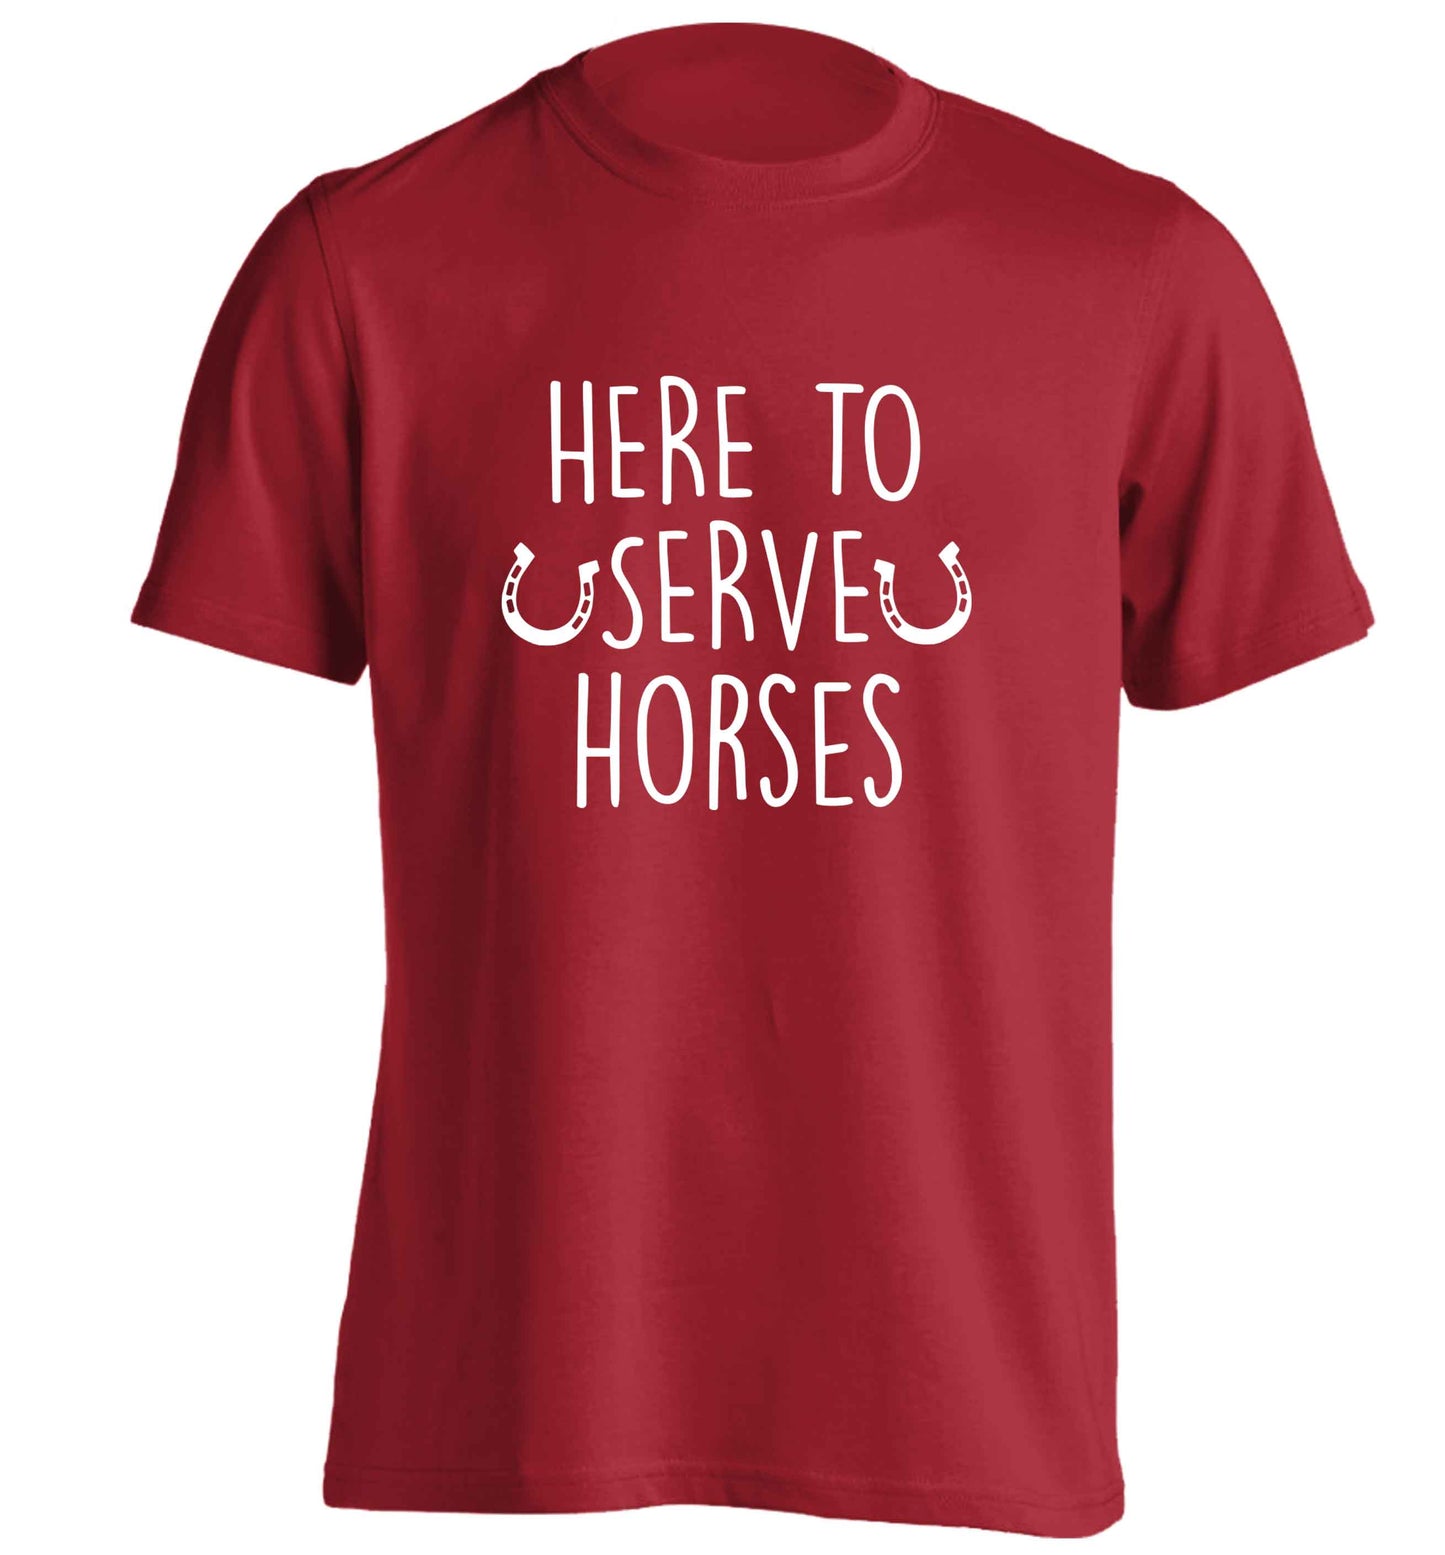 Here to serve horses adults unisex red Tshirt 2XL